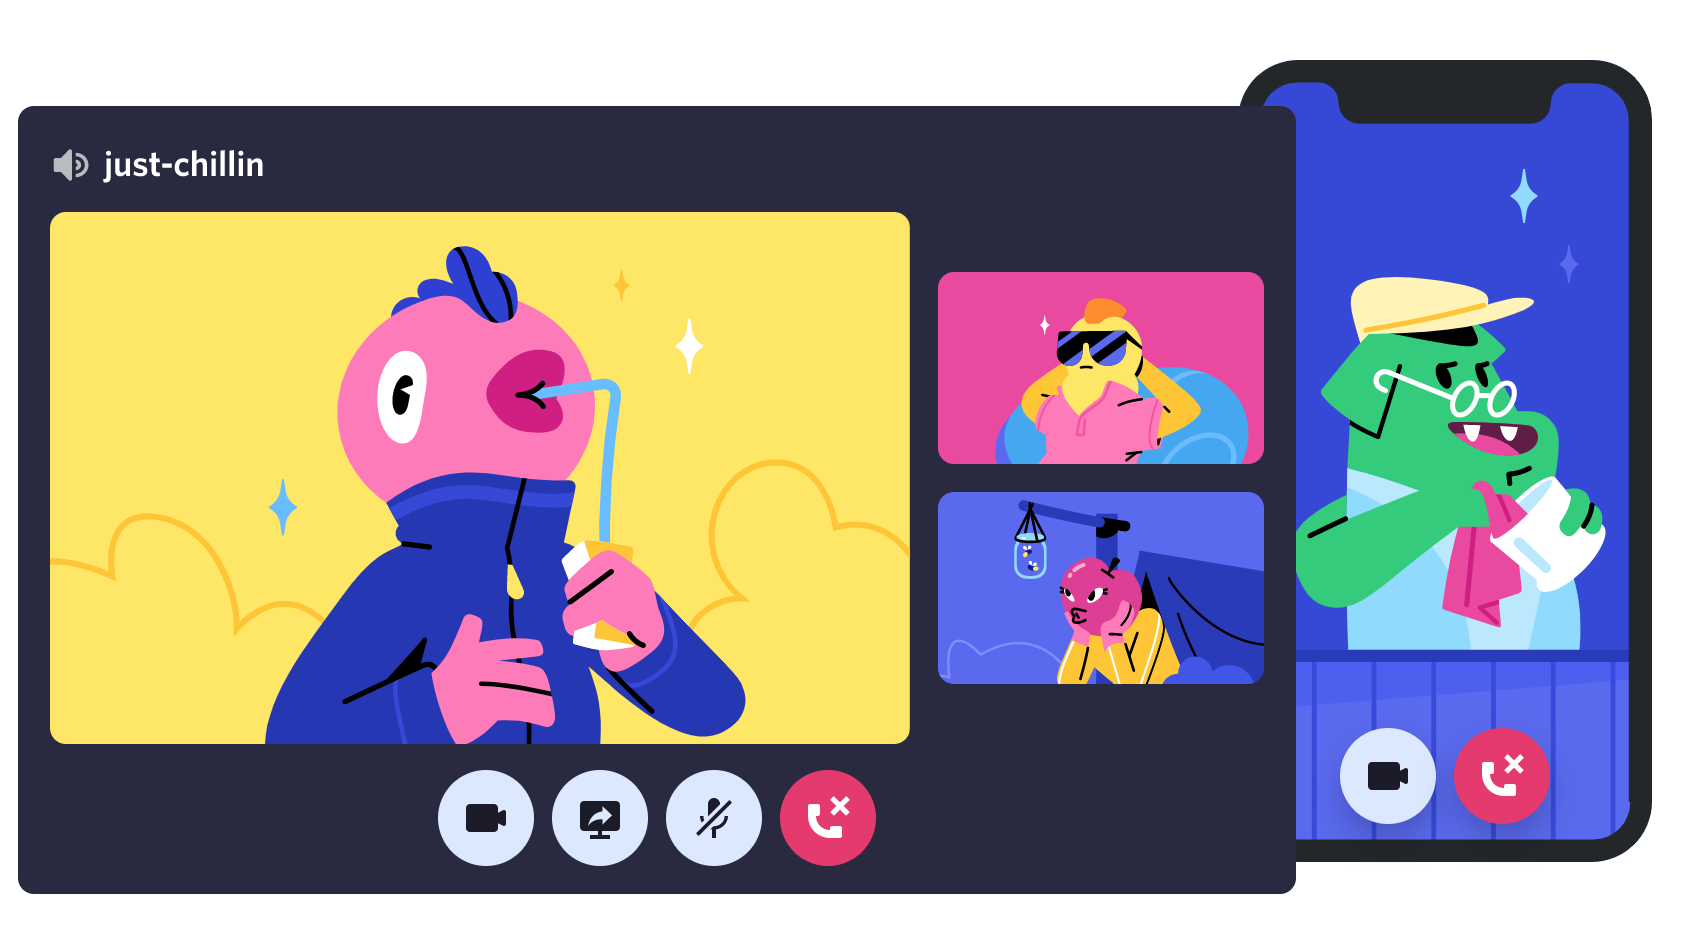 Animated characters talking over Discord video chat